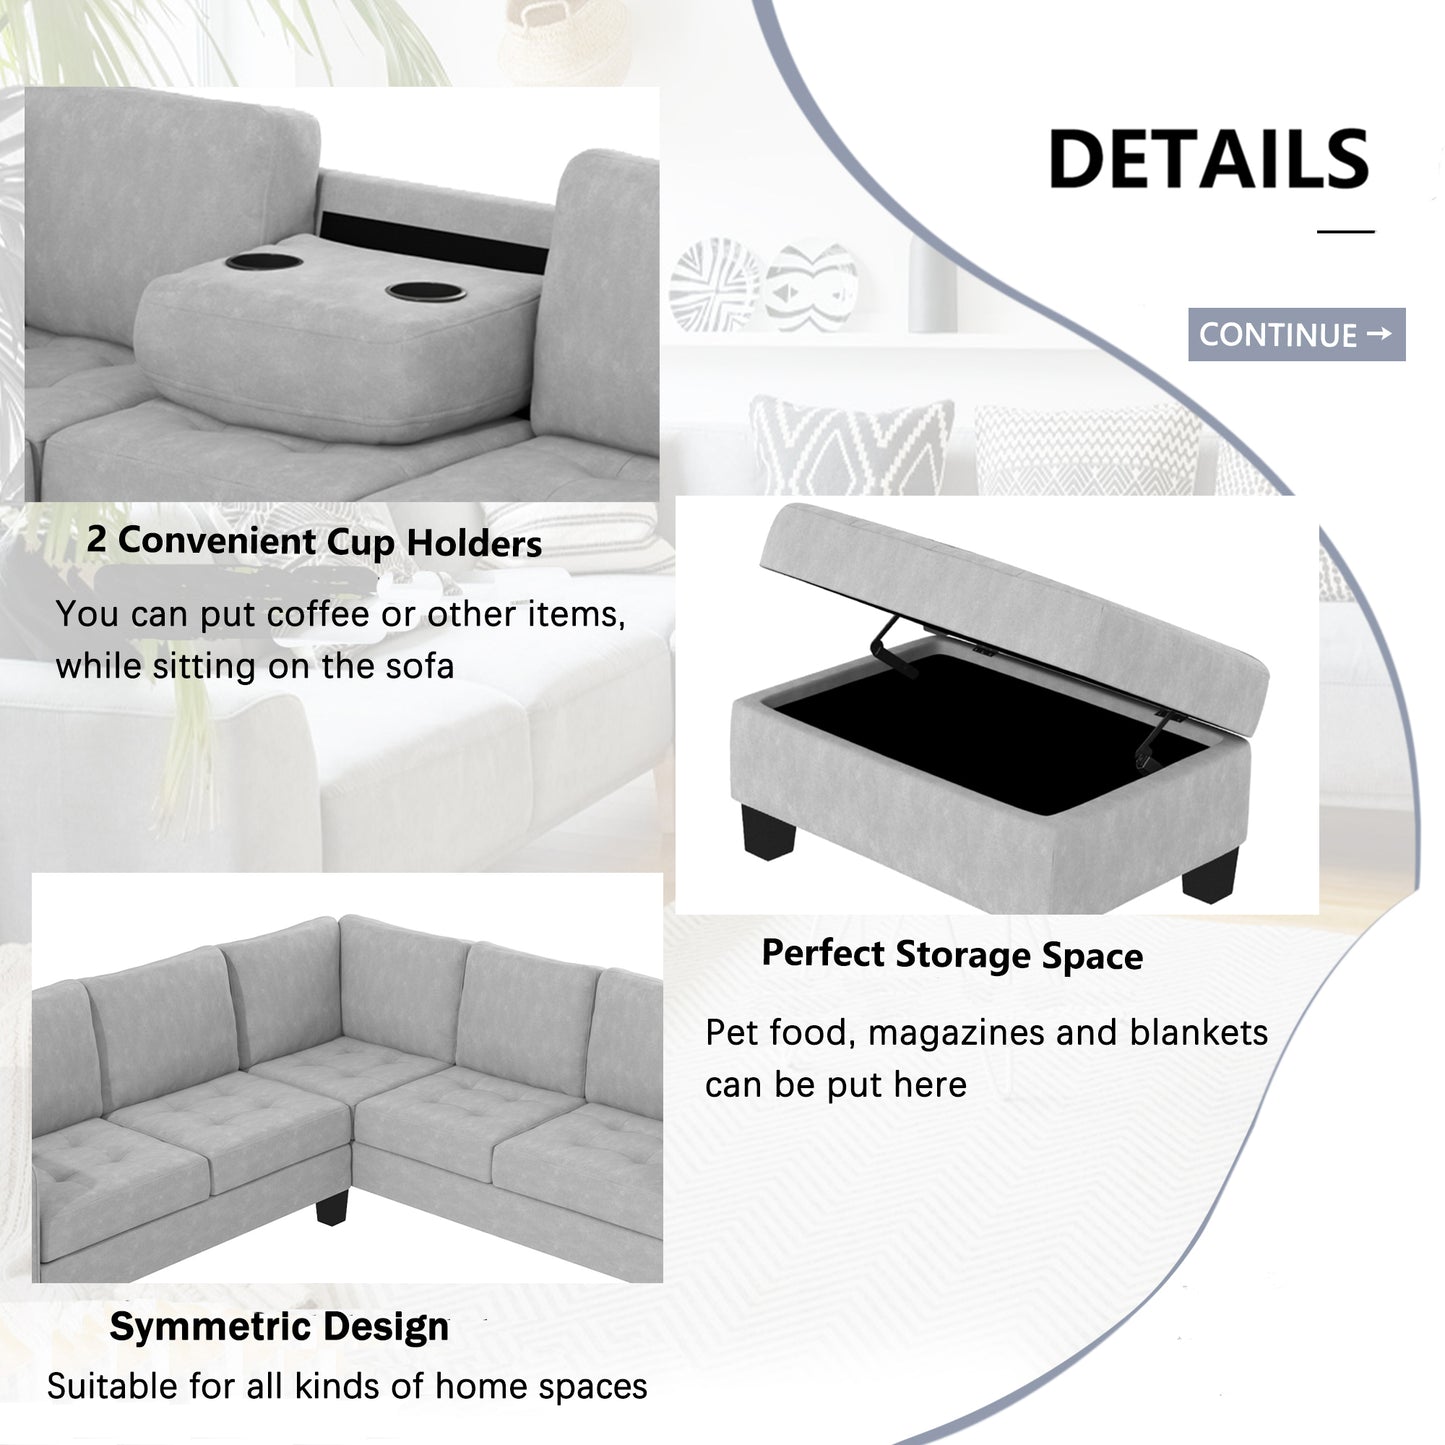 Sectional Corner Sofa L-shape Couch Space Saving with Storage Ottoman & Cup Holders Design for Large Space Dorm Apartment